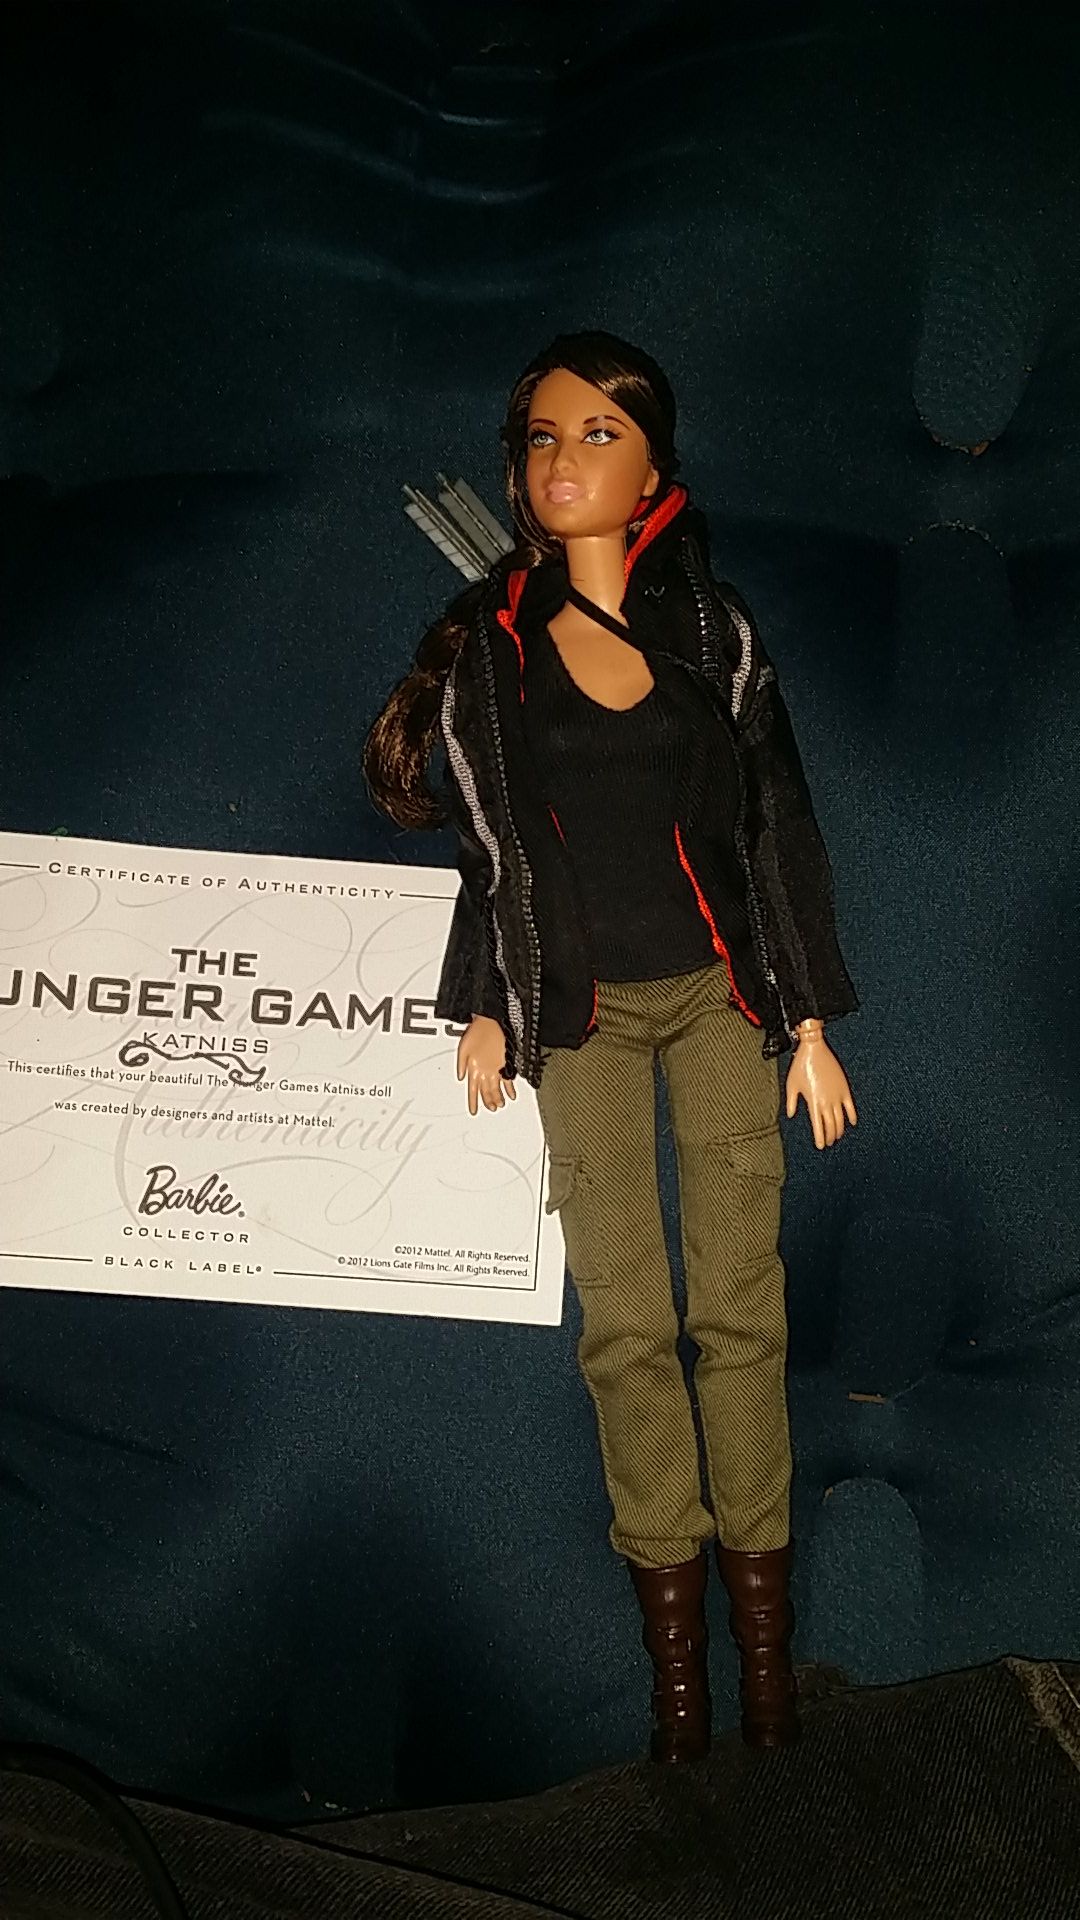 Hunger Games Barbie Katniss doll "Black Label" discontinued and rare!